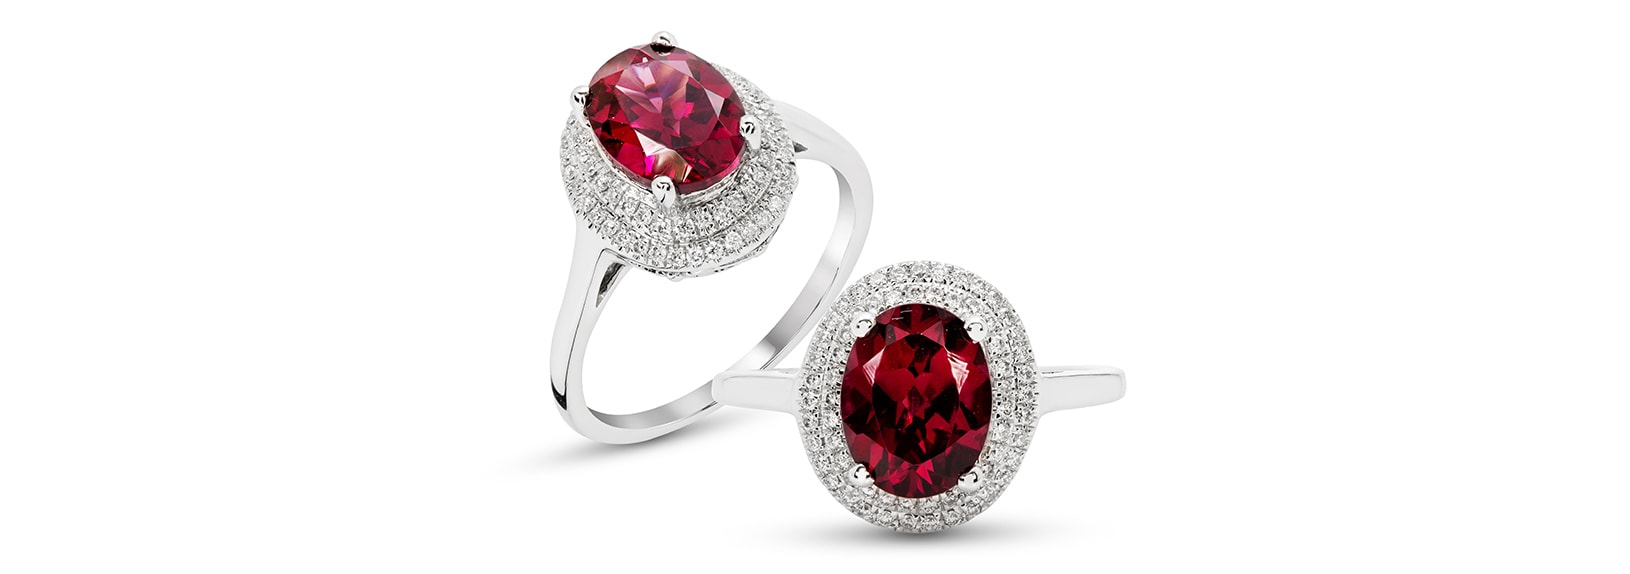 Garnet engagement rings in a halo setting